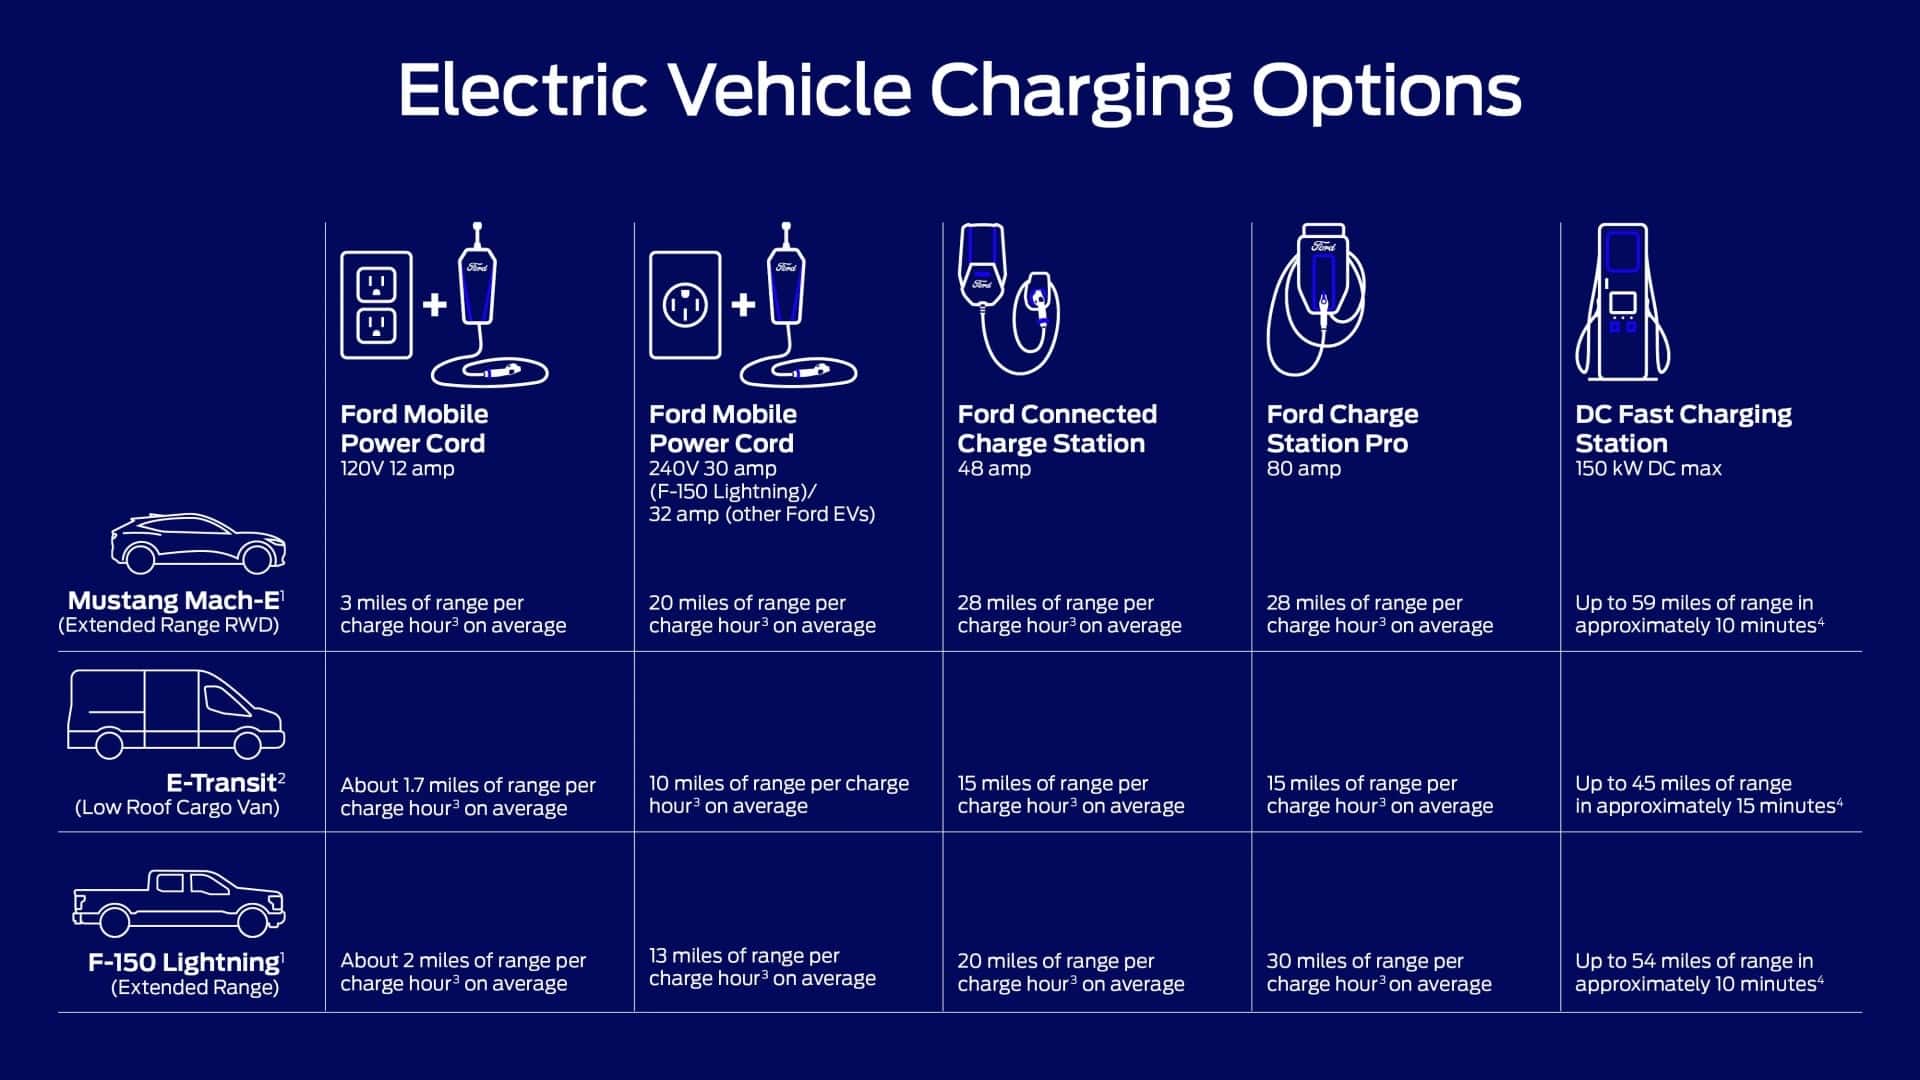 ford expands blueoval charge network by 25% to over 106,000 chargers